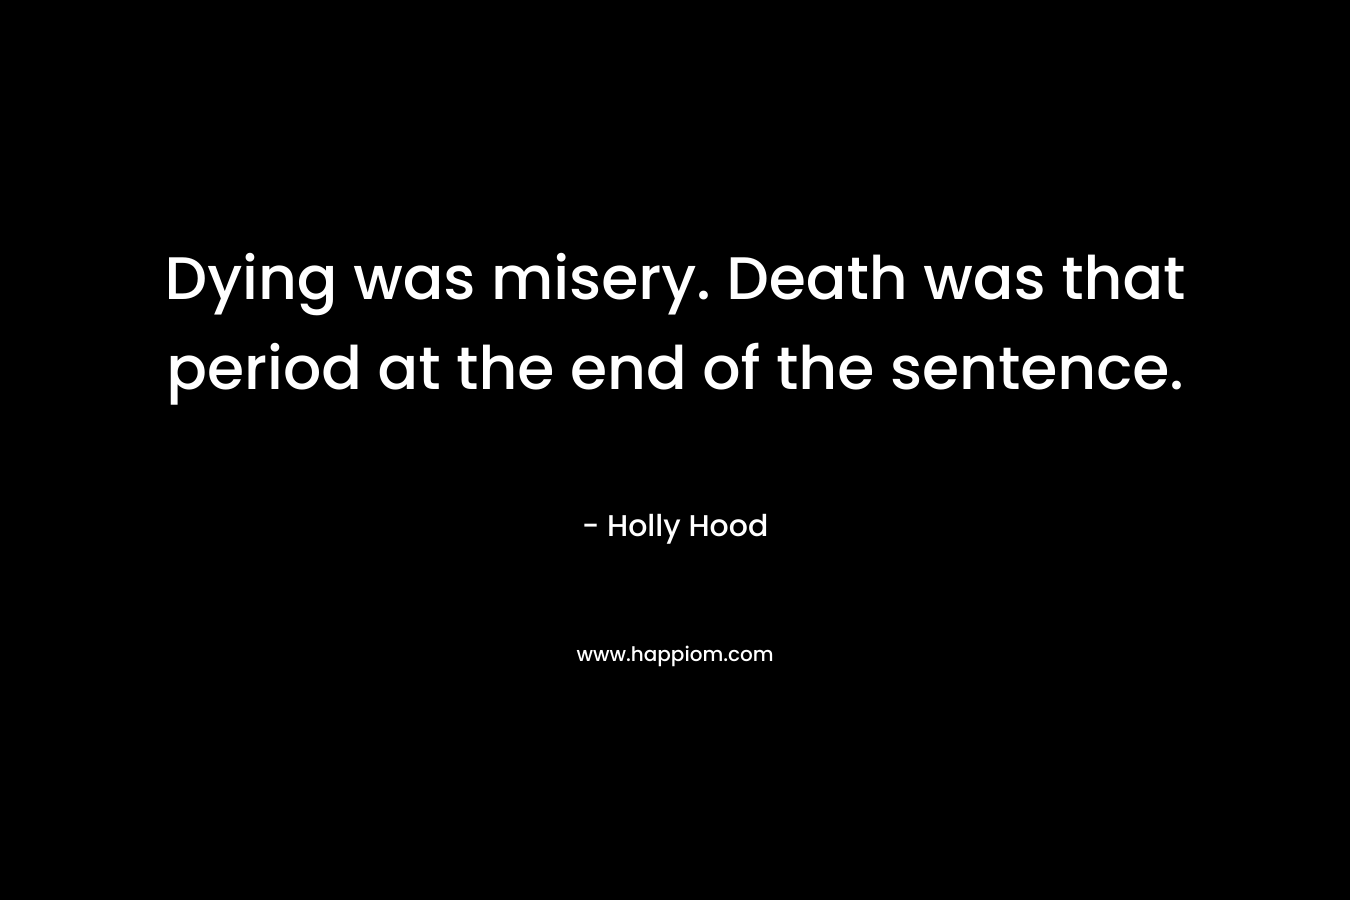 Dying was misery. Death was that period at the end of the sentence. – Holly Hood